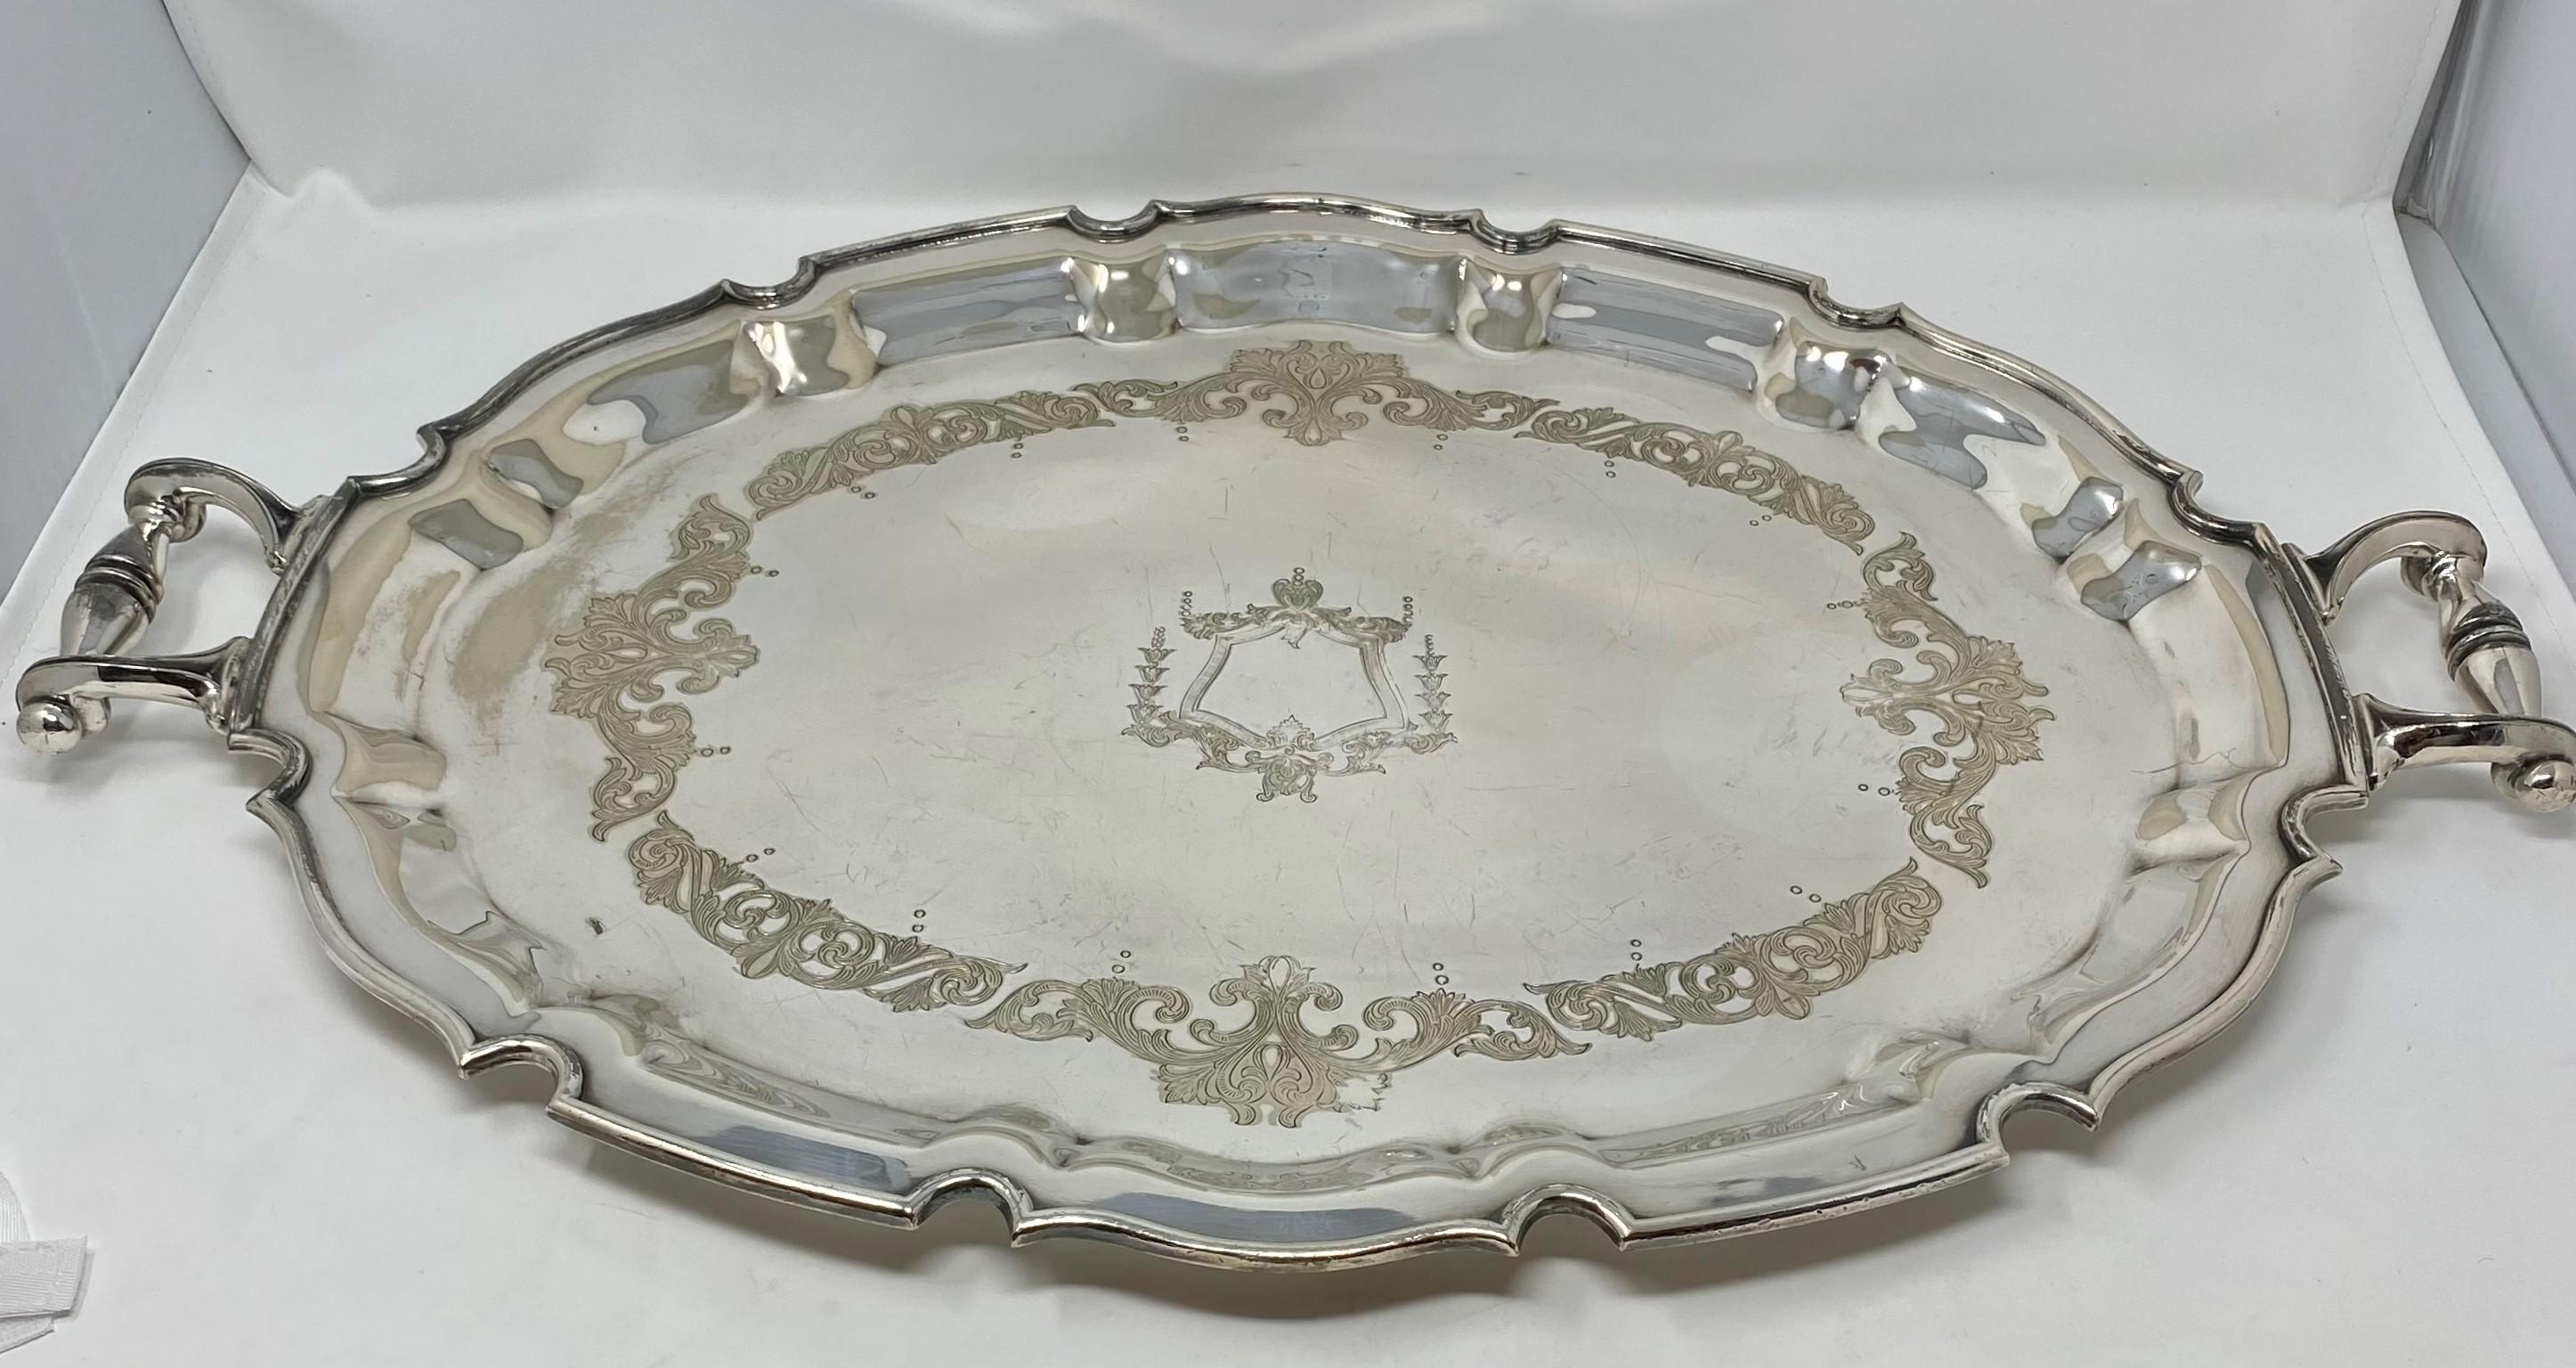 20th Century Estate English Silver-Plated Serving Tray with Handles, circa 1910-1930